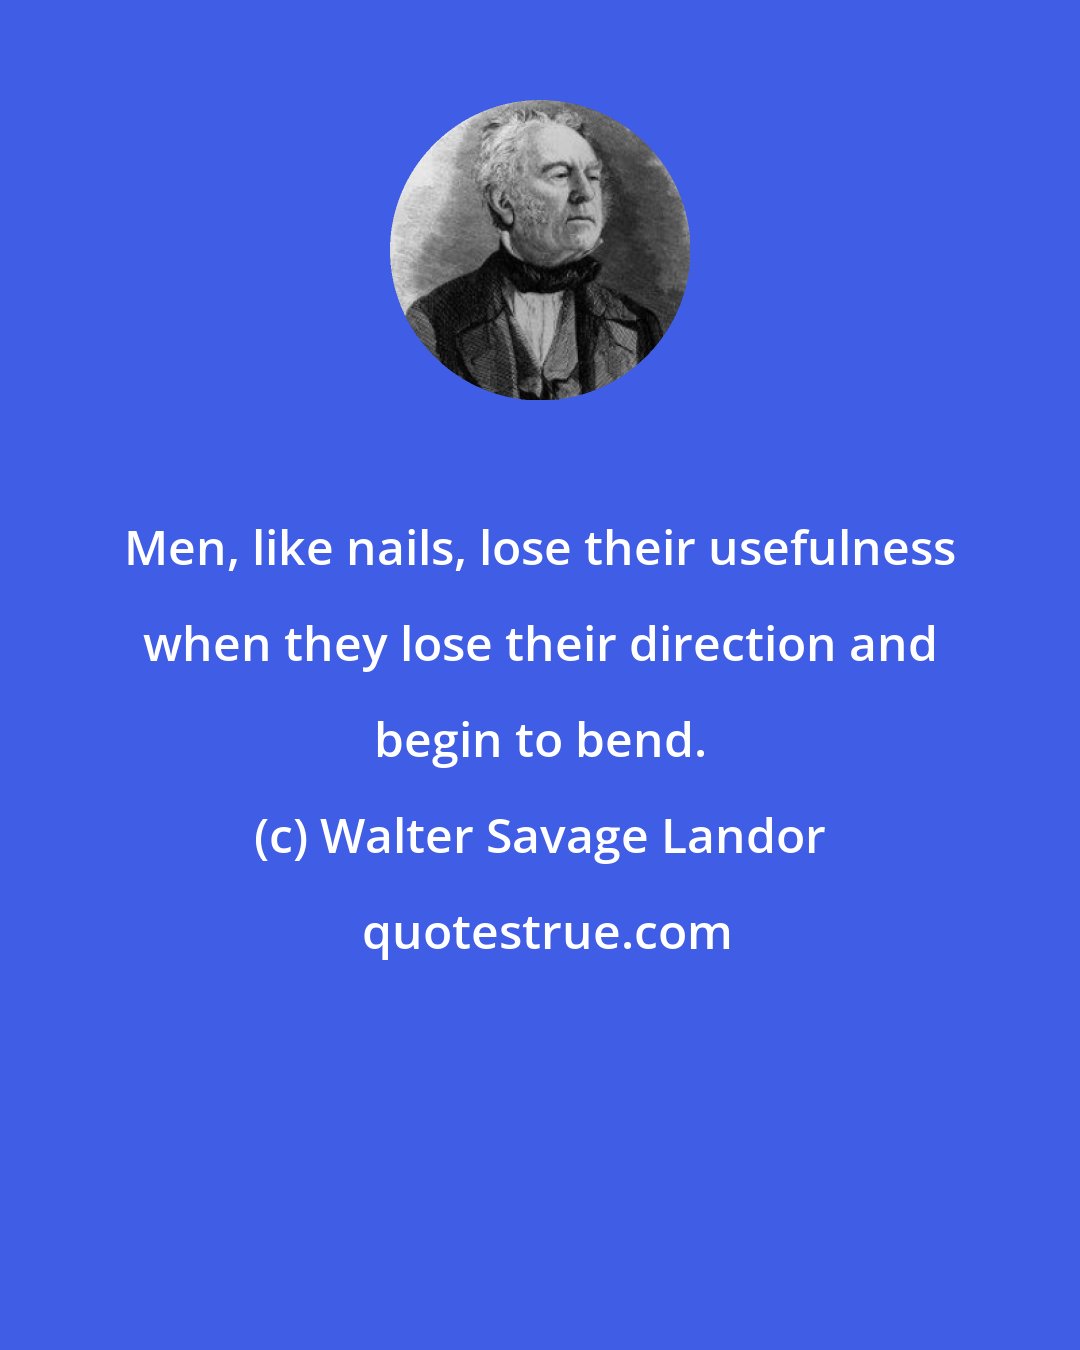 Walter Savage Landor: Men, like nails, lose their usefulness when they lose their direction and begin to bend.